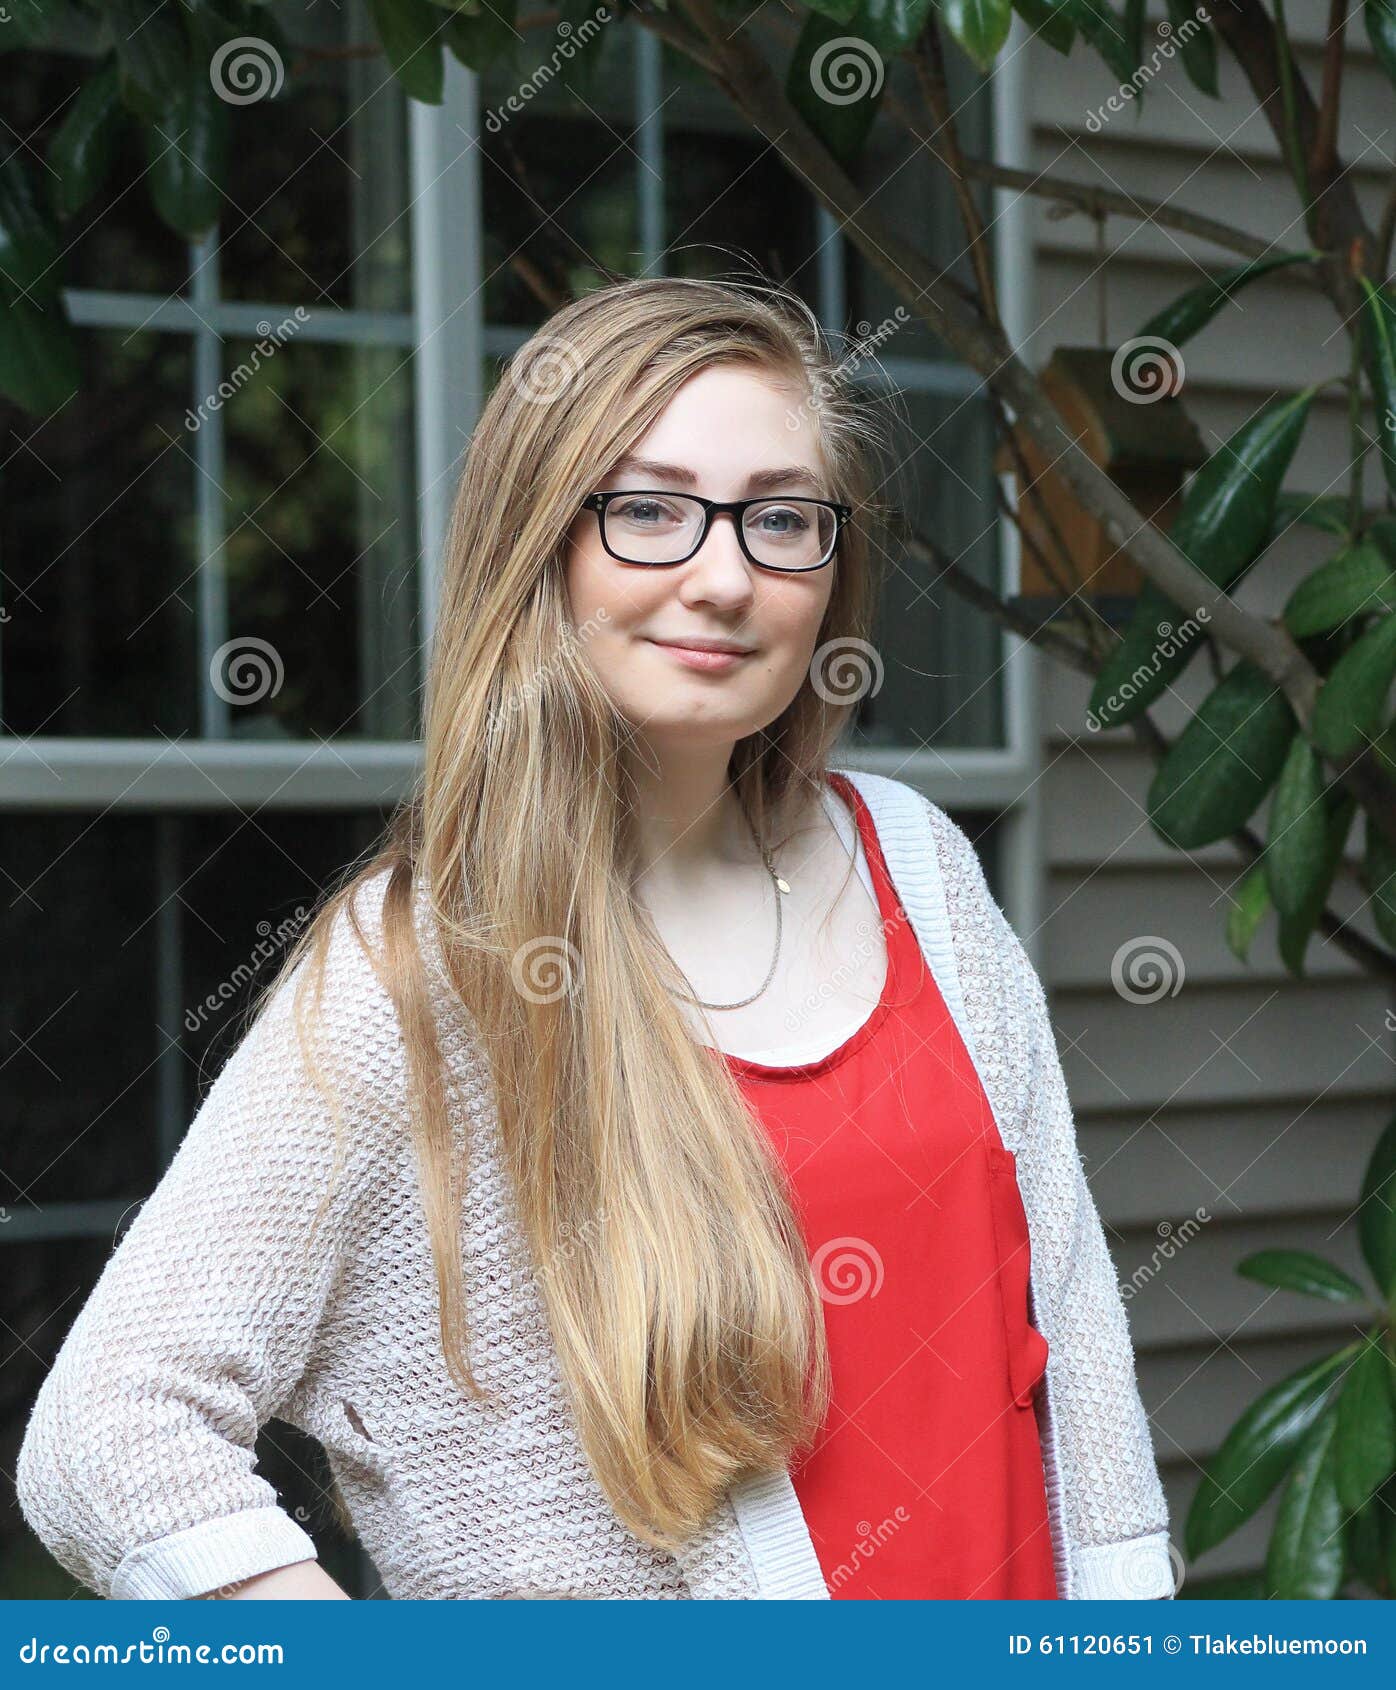 Teen Girl 1 Stock Image Image Of Style Shirt Blond